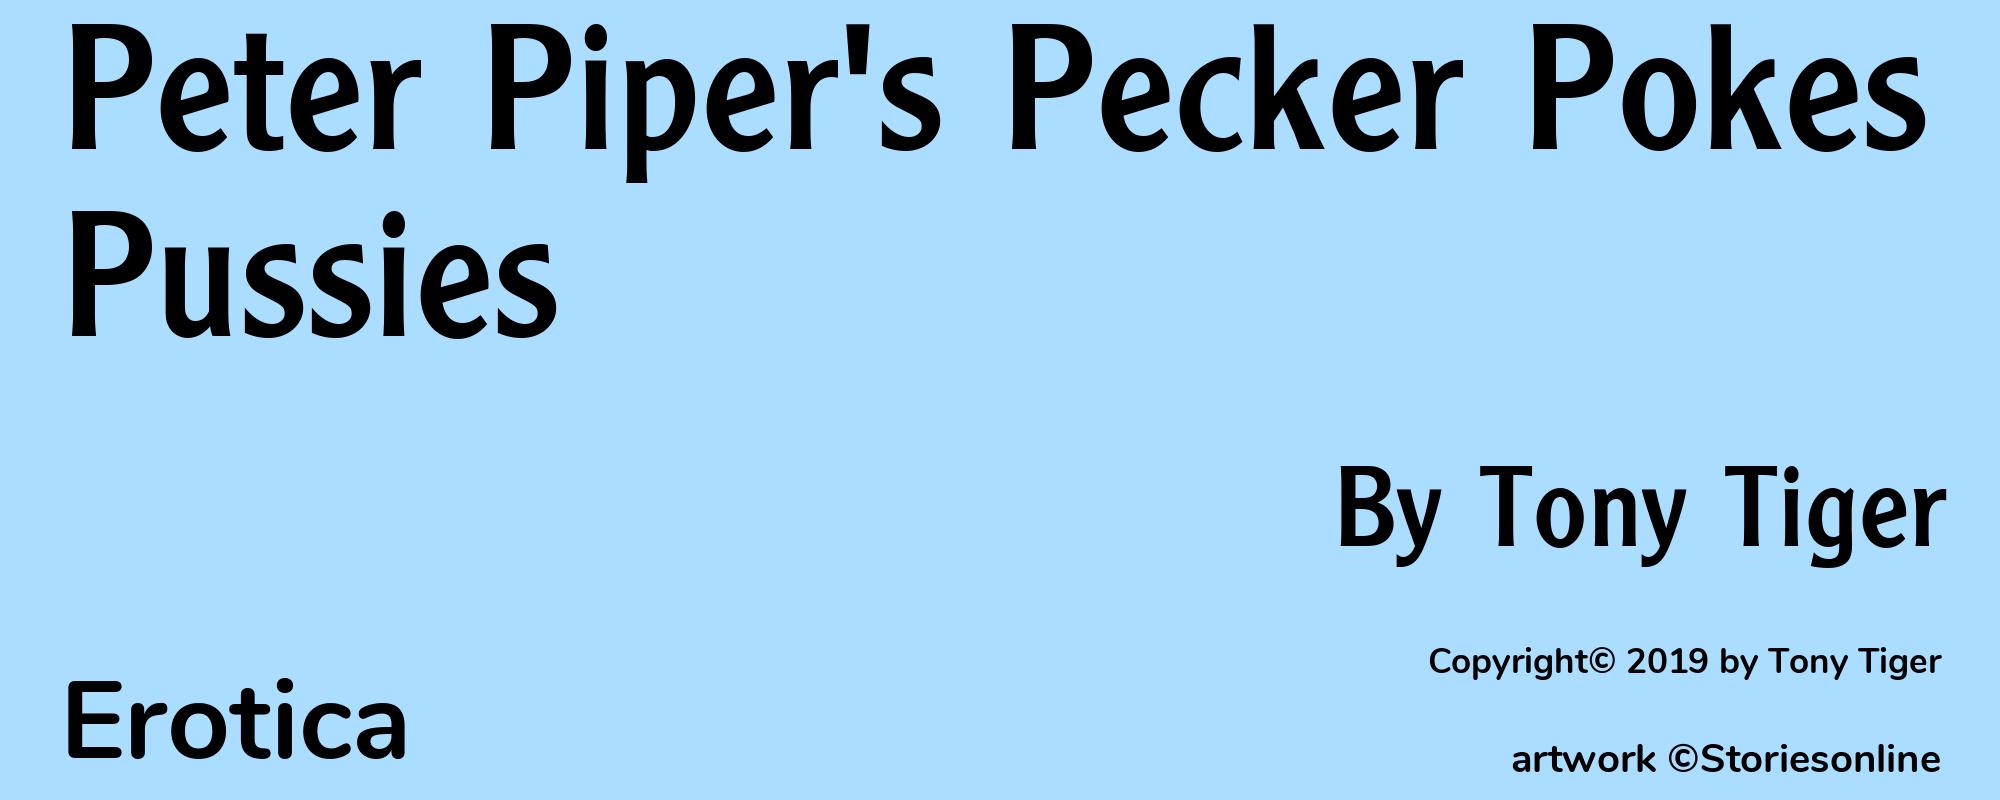 Peter Piper's Pecker Pokes Pussies - Cover